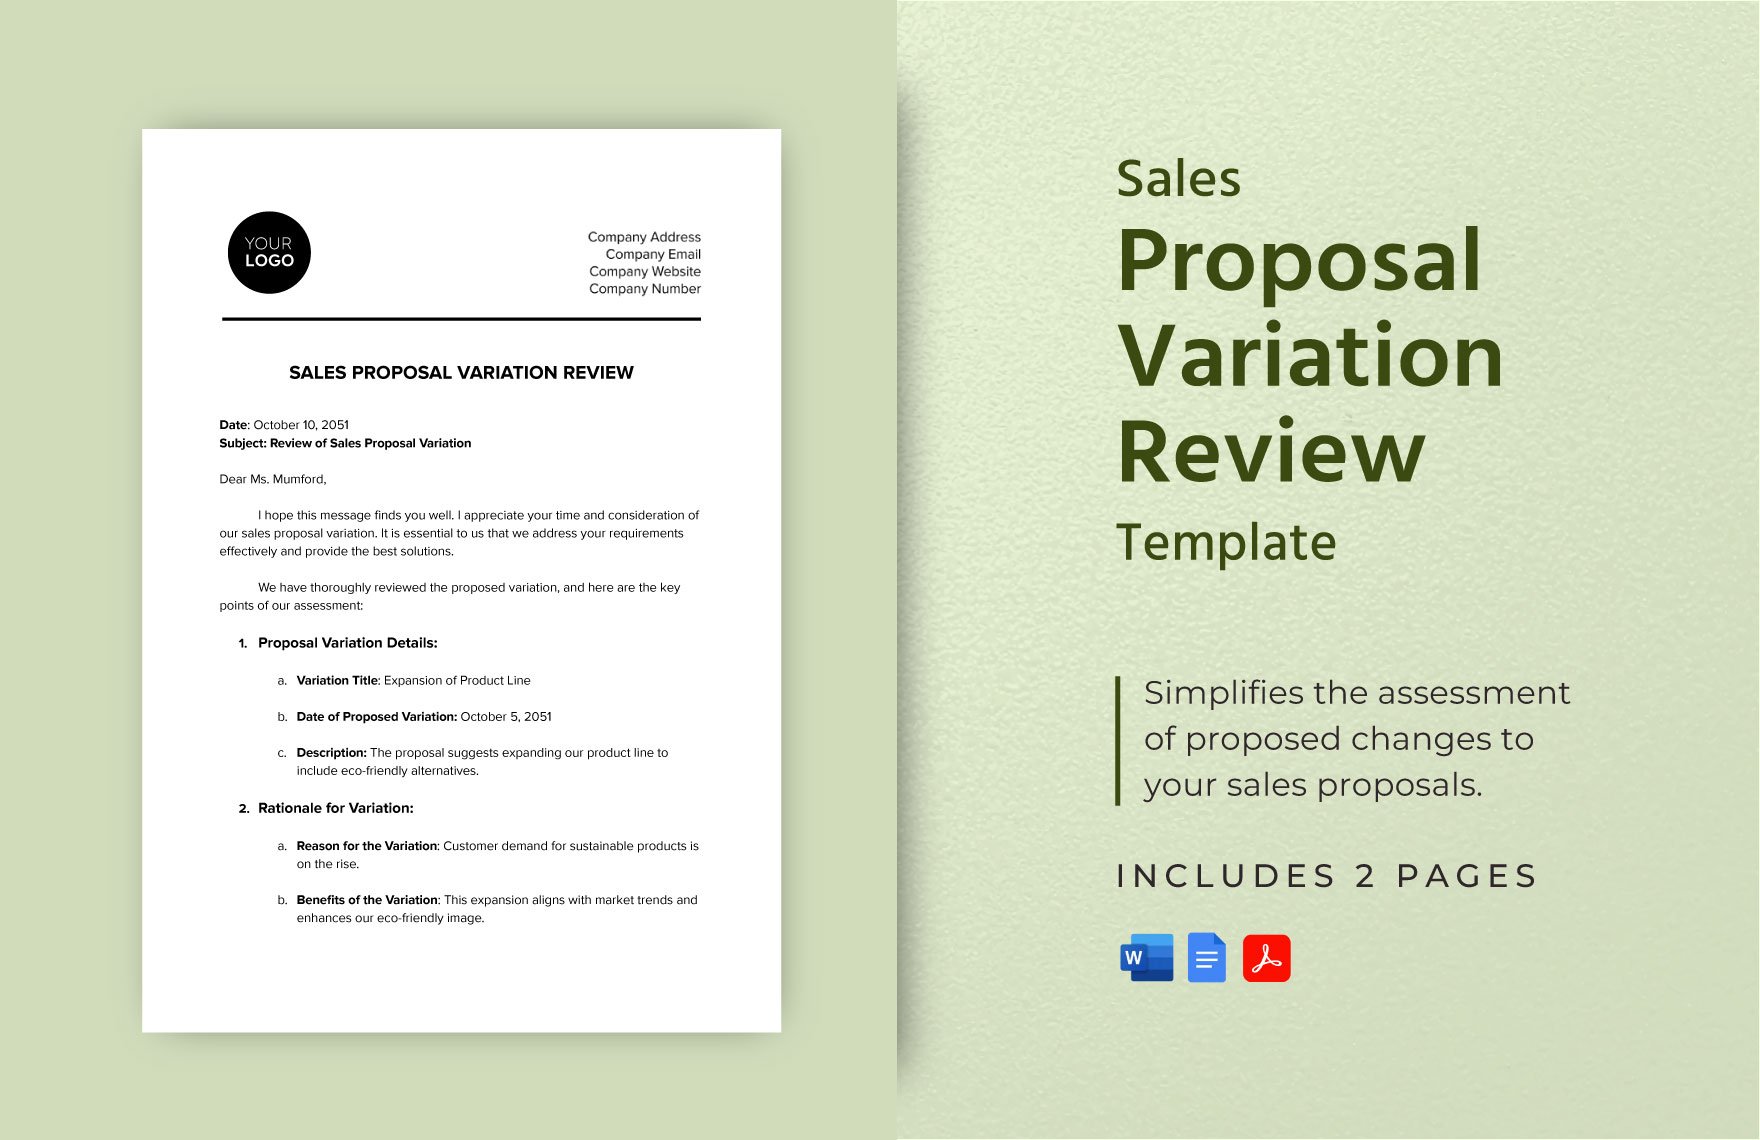 Sales Proposal Variation Review Template in Word, Google Docs, PDF